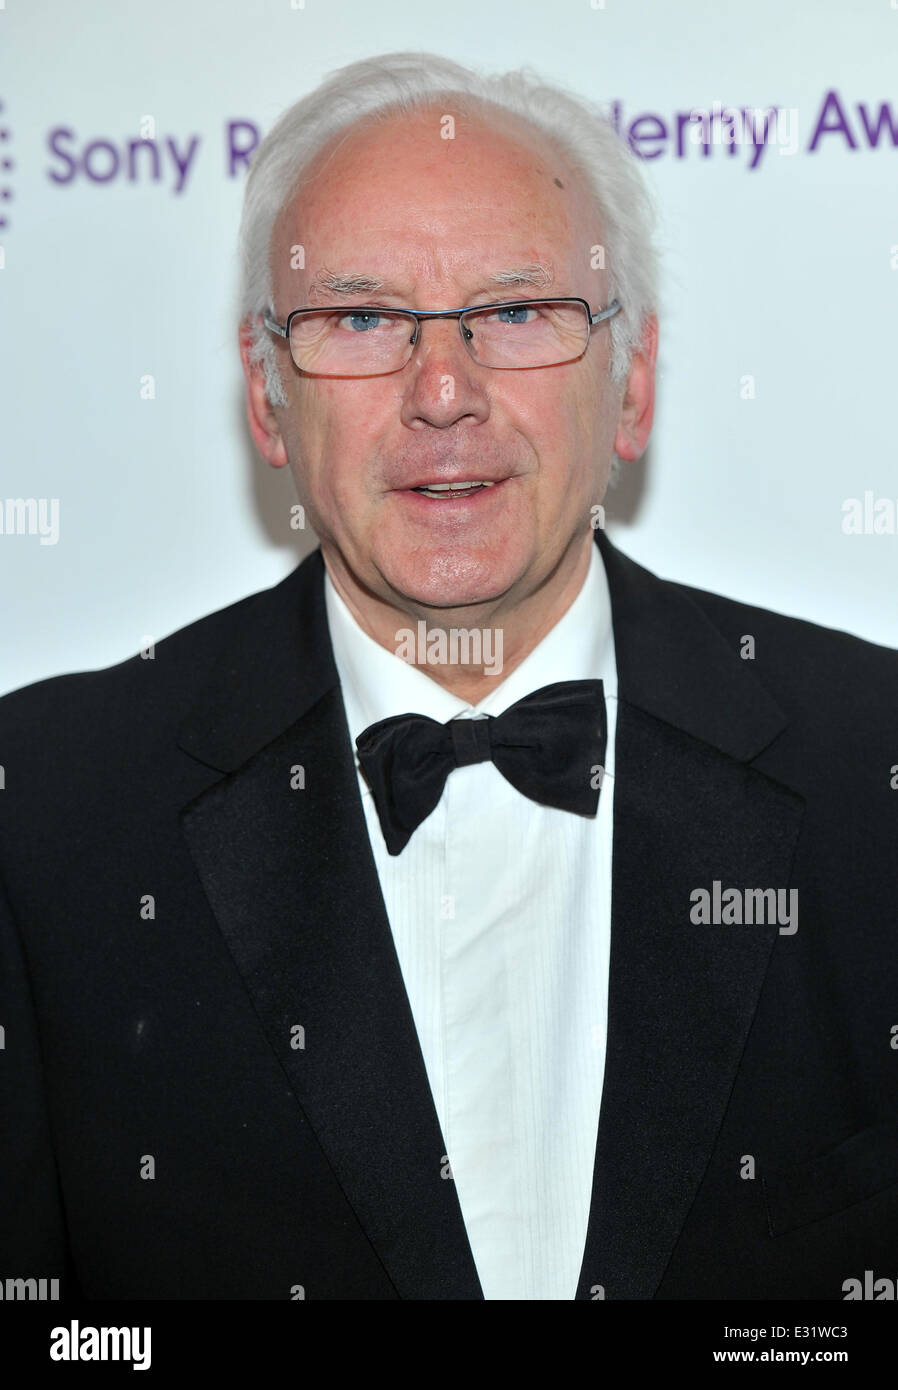 Sony Radio Academy Awards held at the Grosvenor House- Arrivals  Featuring: Pete Waterman Where: London, United Kingdom When: 13 May 2013 Stock Photo